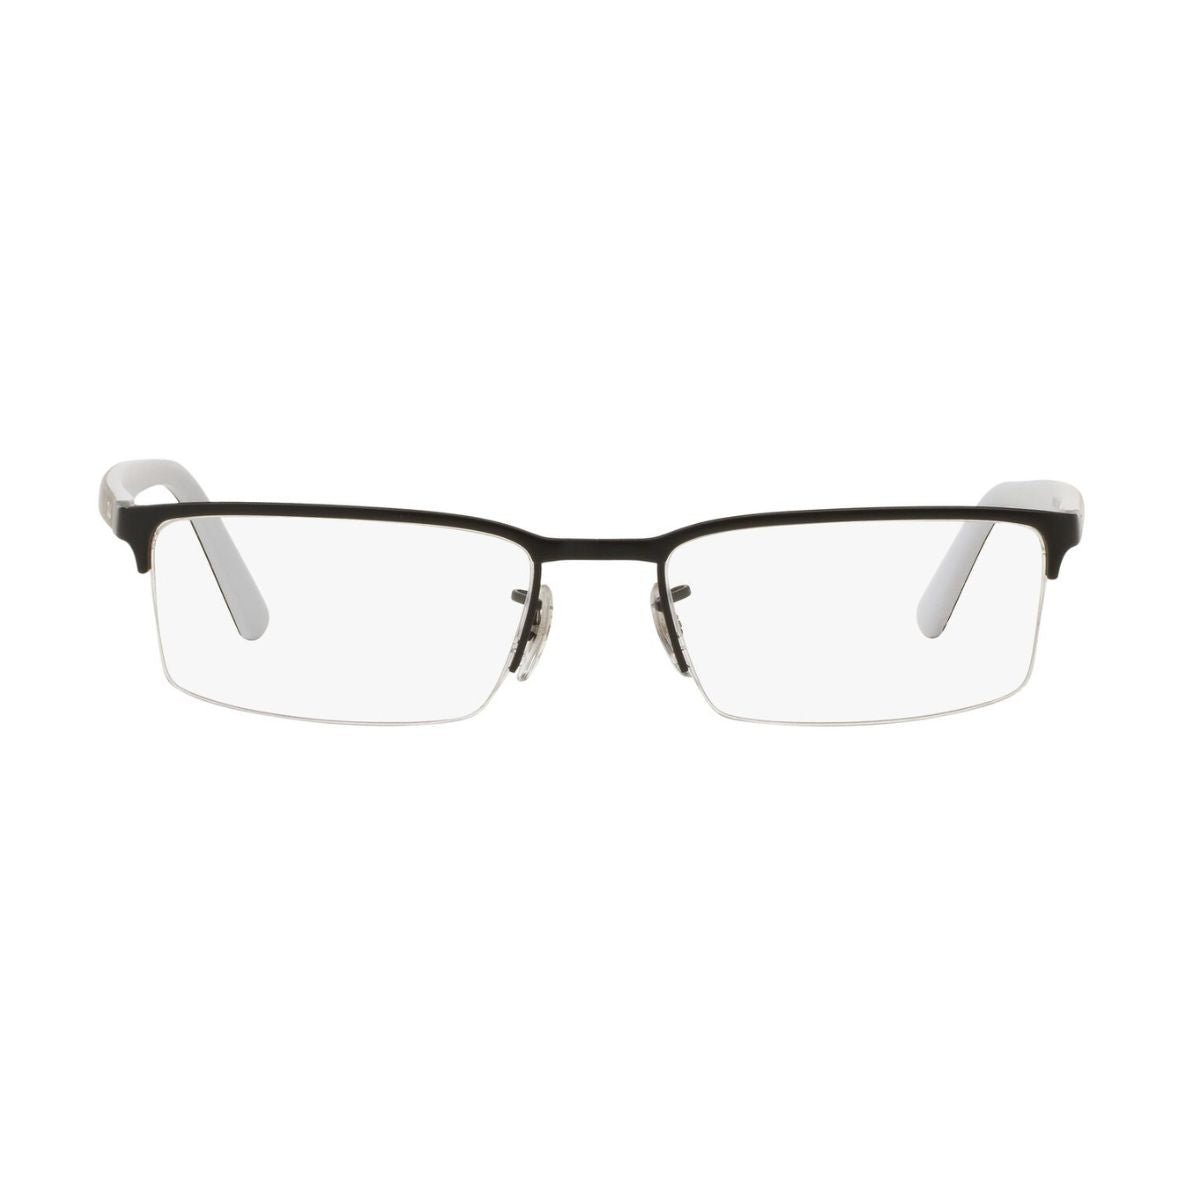 "buy Rayban 6271I 2802 rectangle frame for men and women online at optorium"